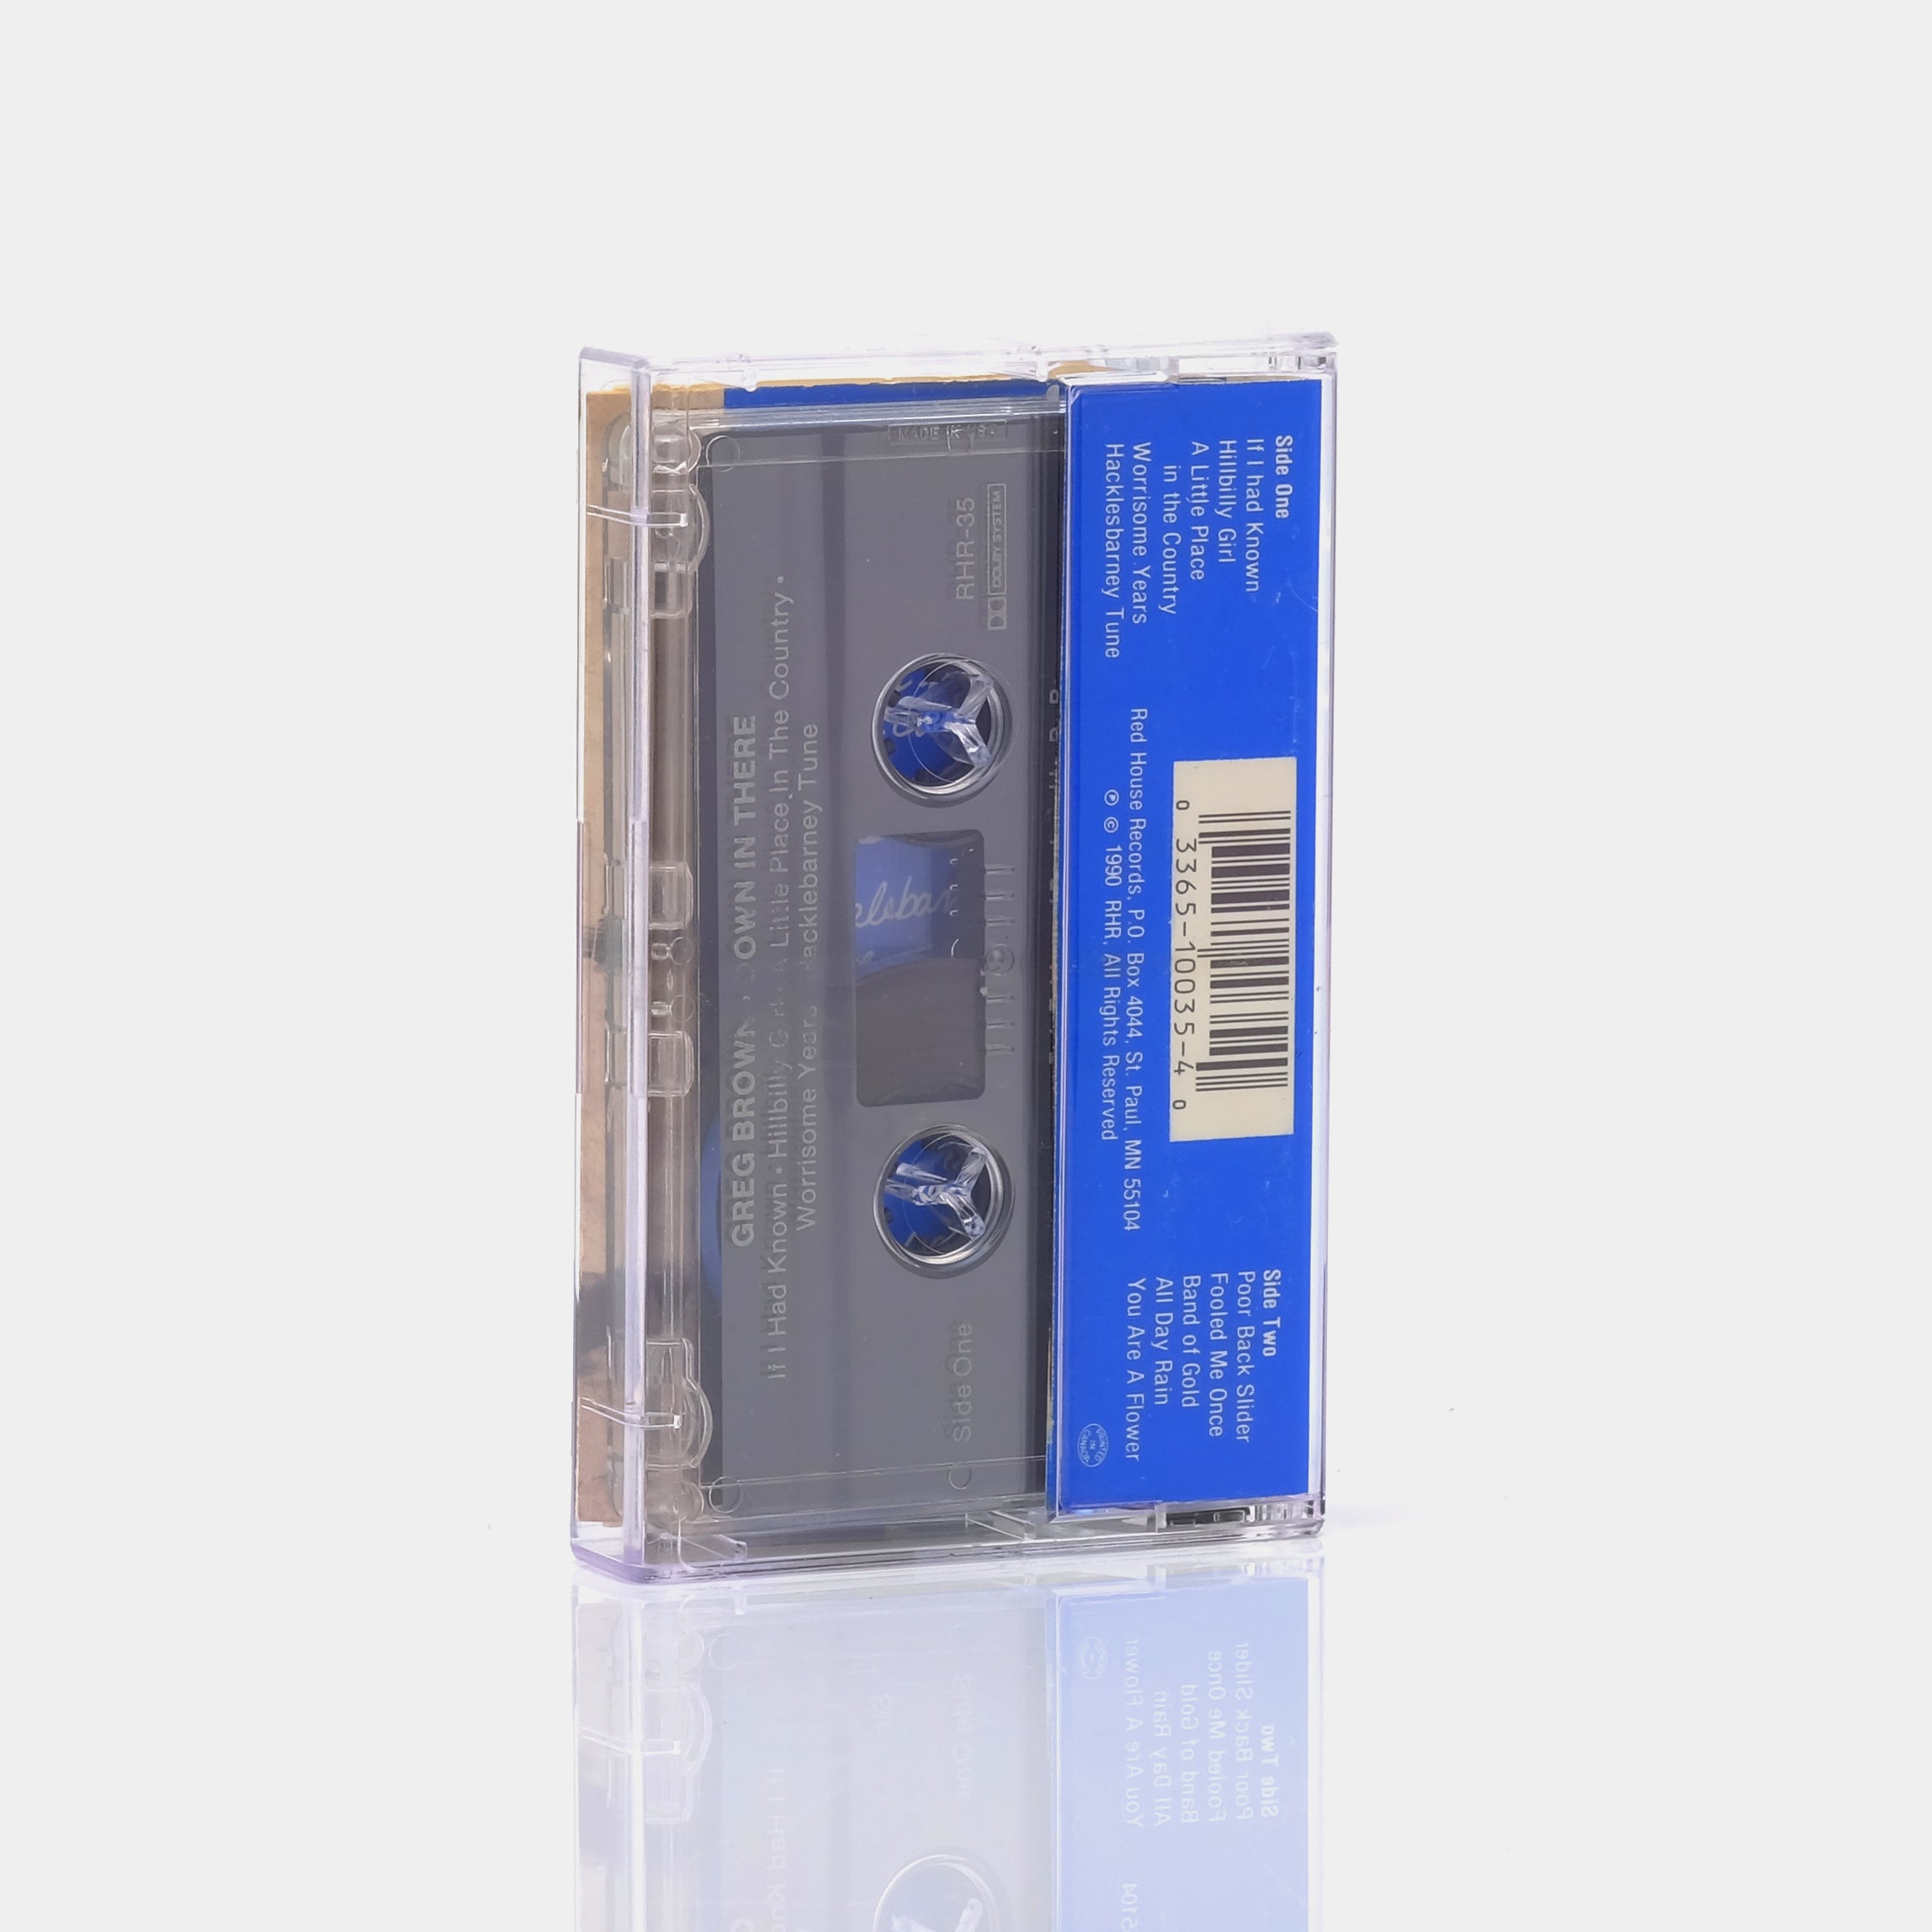 Greg Brown - Down In There Cassette Tape